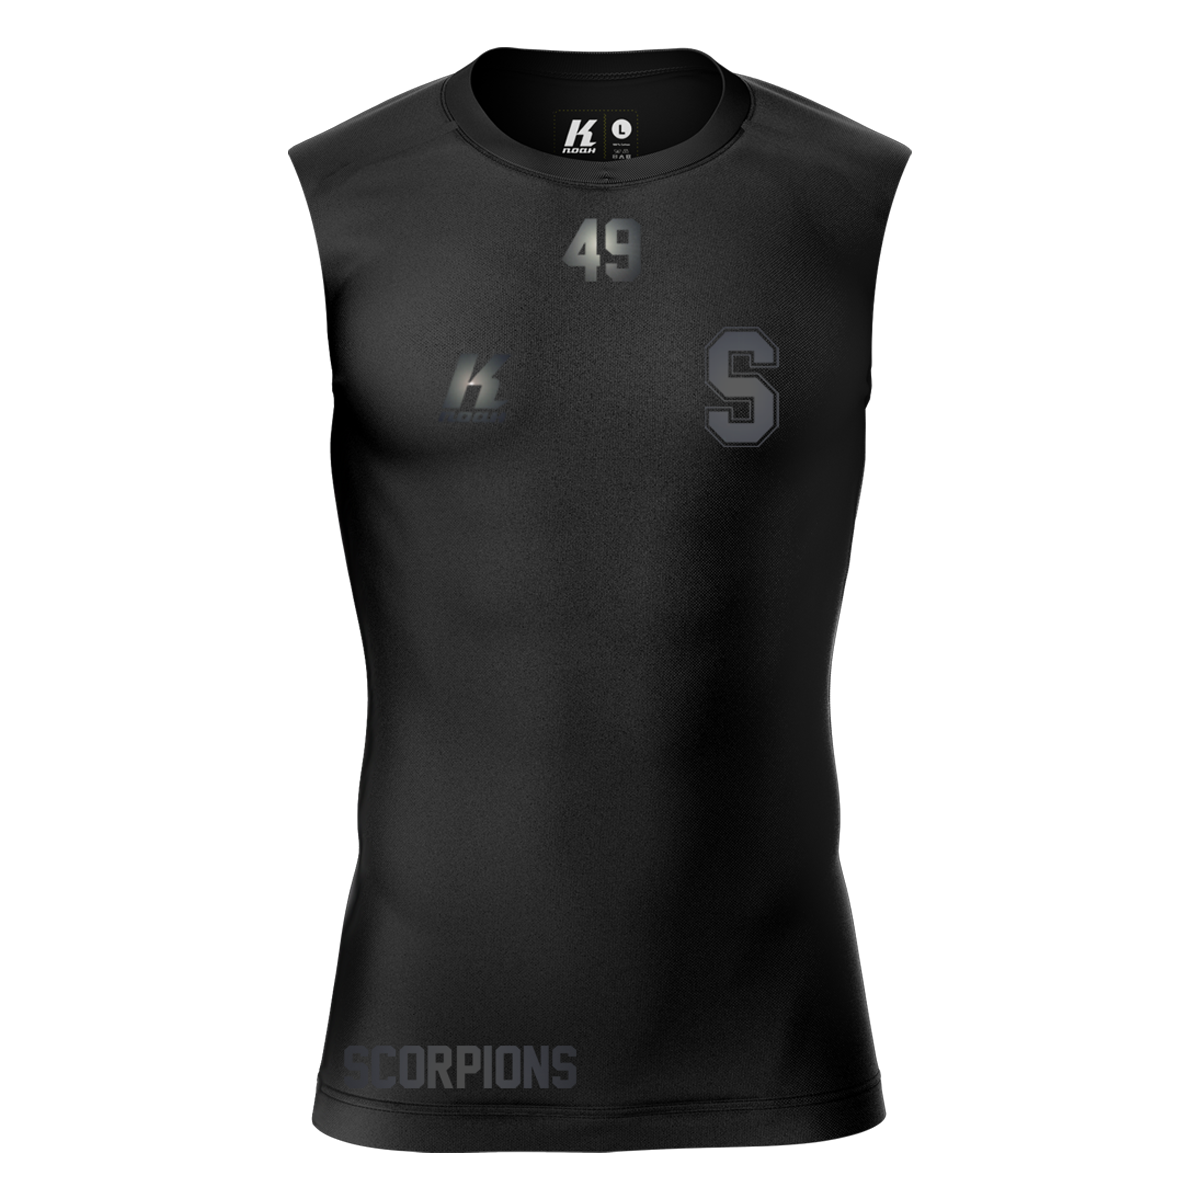 Scorpions "Blackline" K.Tech Compression Sleeveless Shirt with Playernumber/Initials